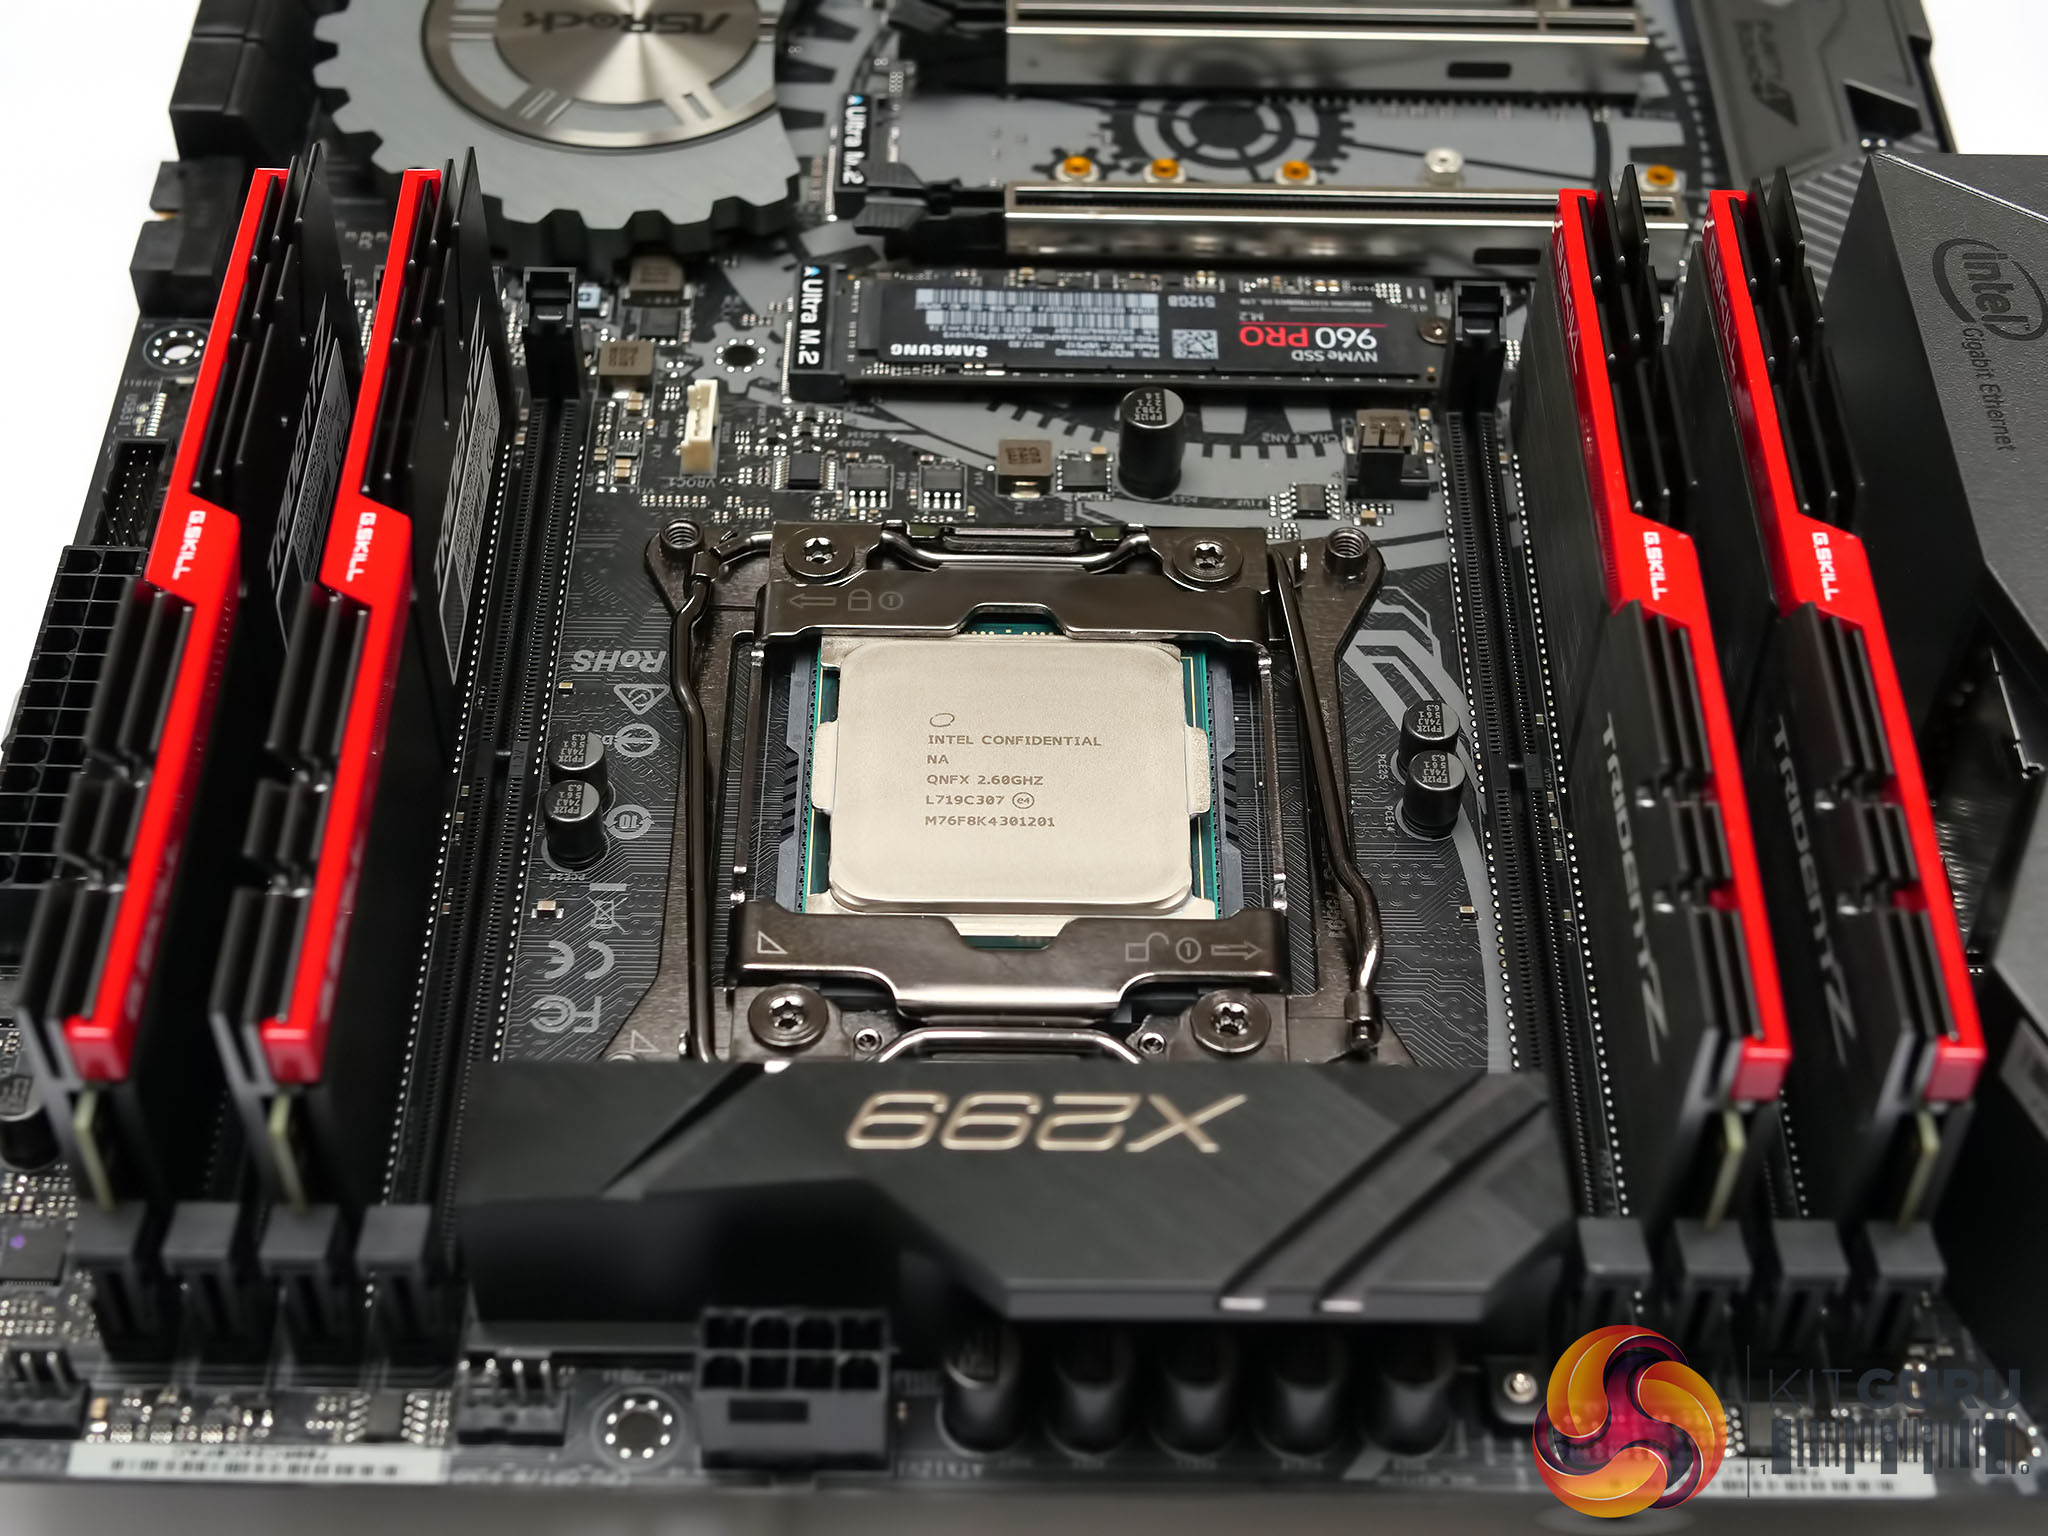 Intel Core i9-7980XE Extreme Edition – 18 cores of overclocked CPU madness